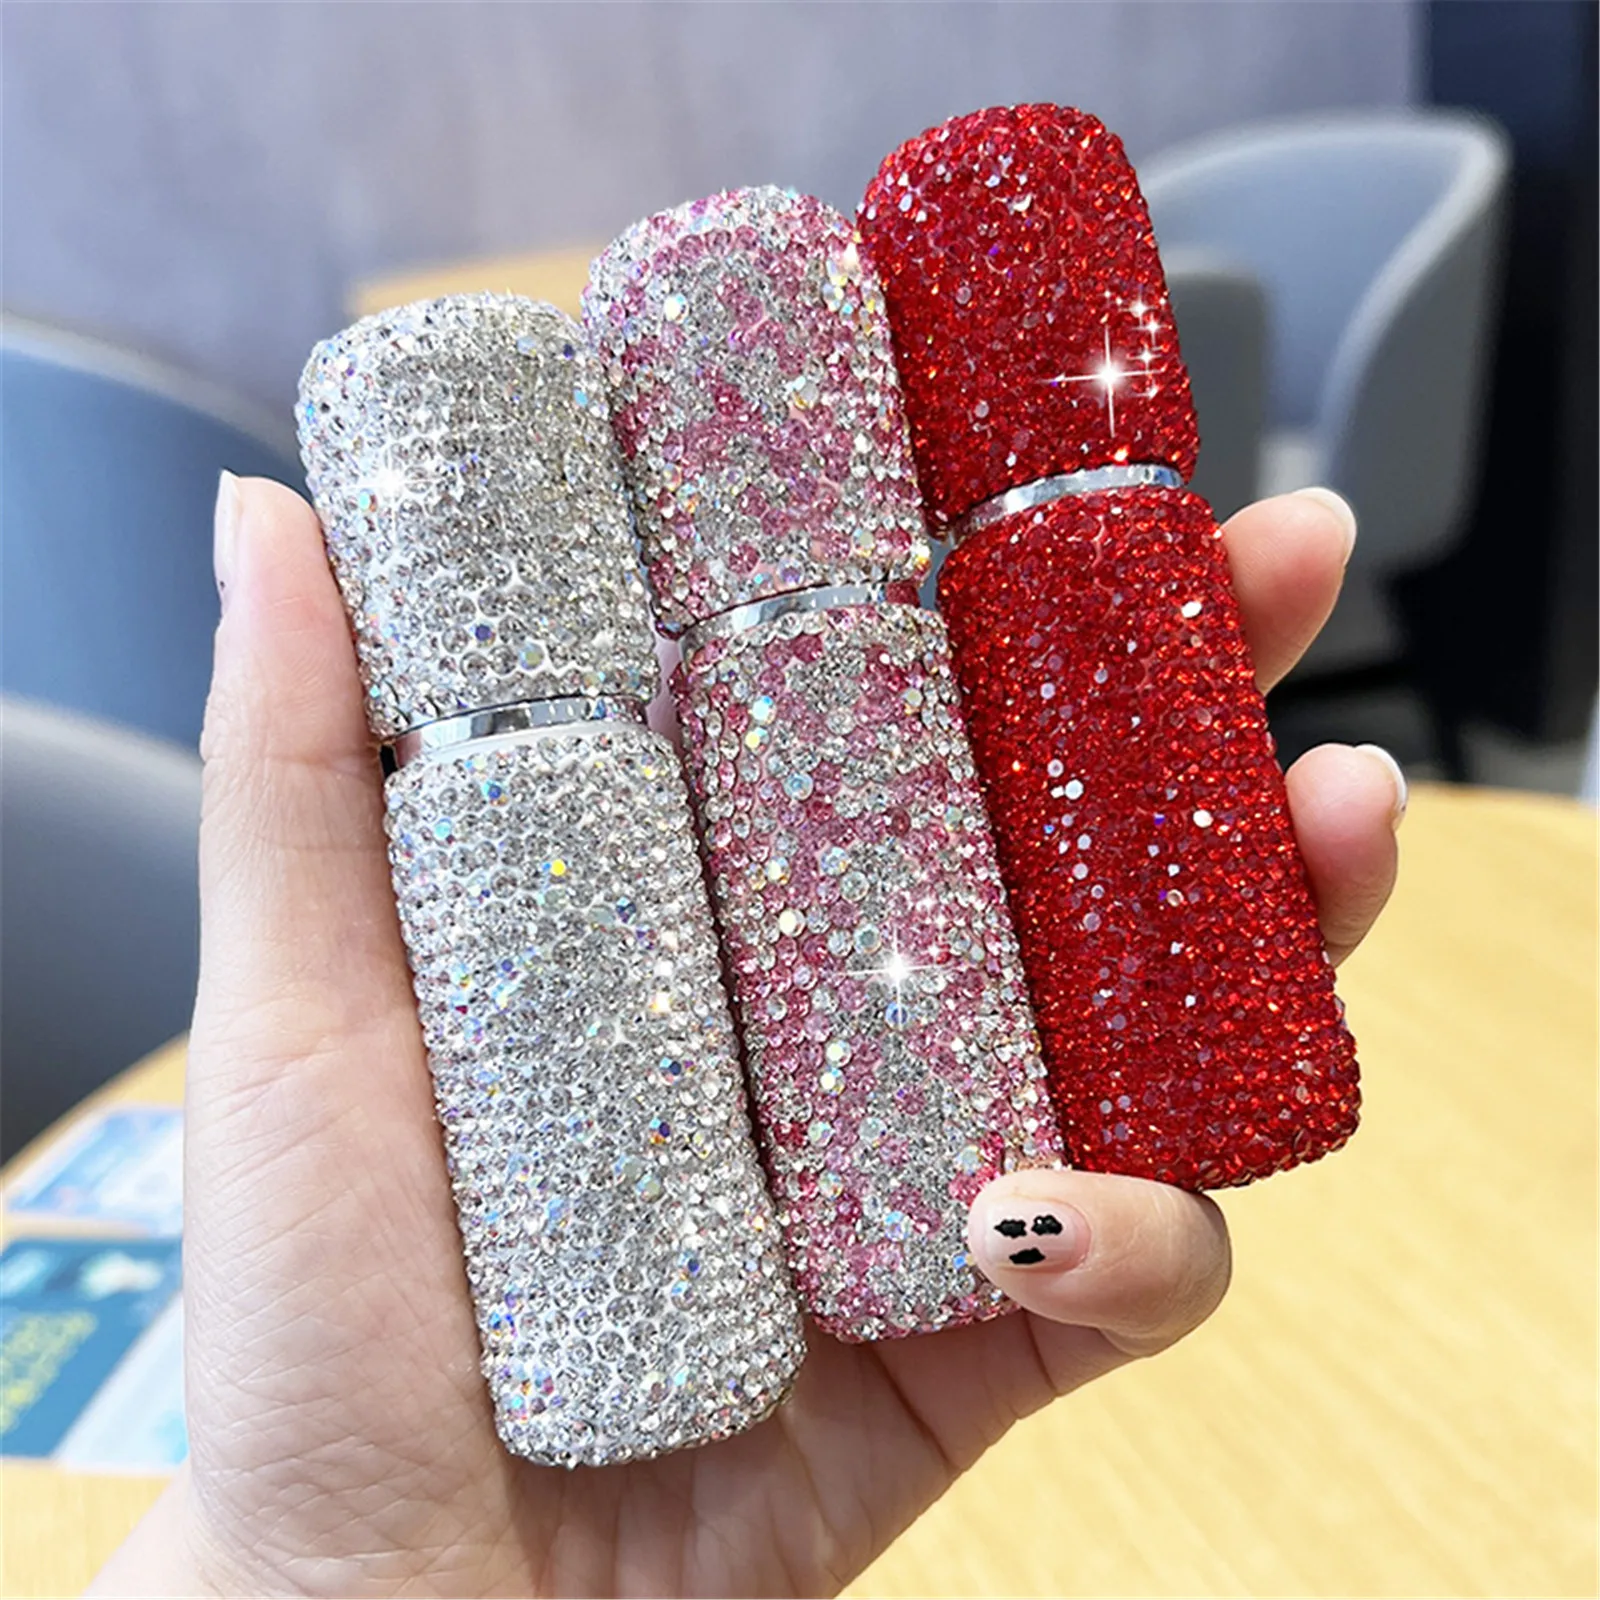 

10ml Portable Diamond Refillable Perfume Bottles Mini Glass Spray Pump Bottle Empty Cosmetic Containers Atomizer For Travel